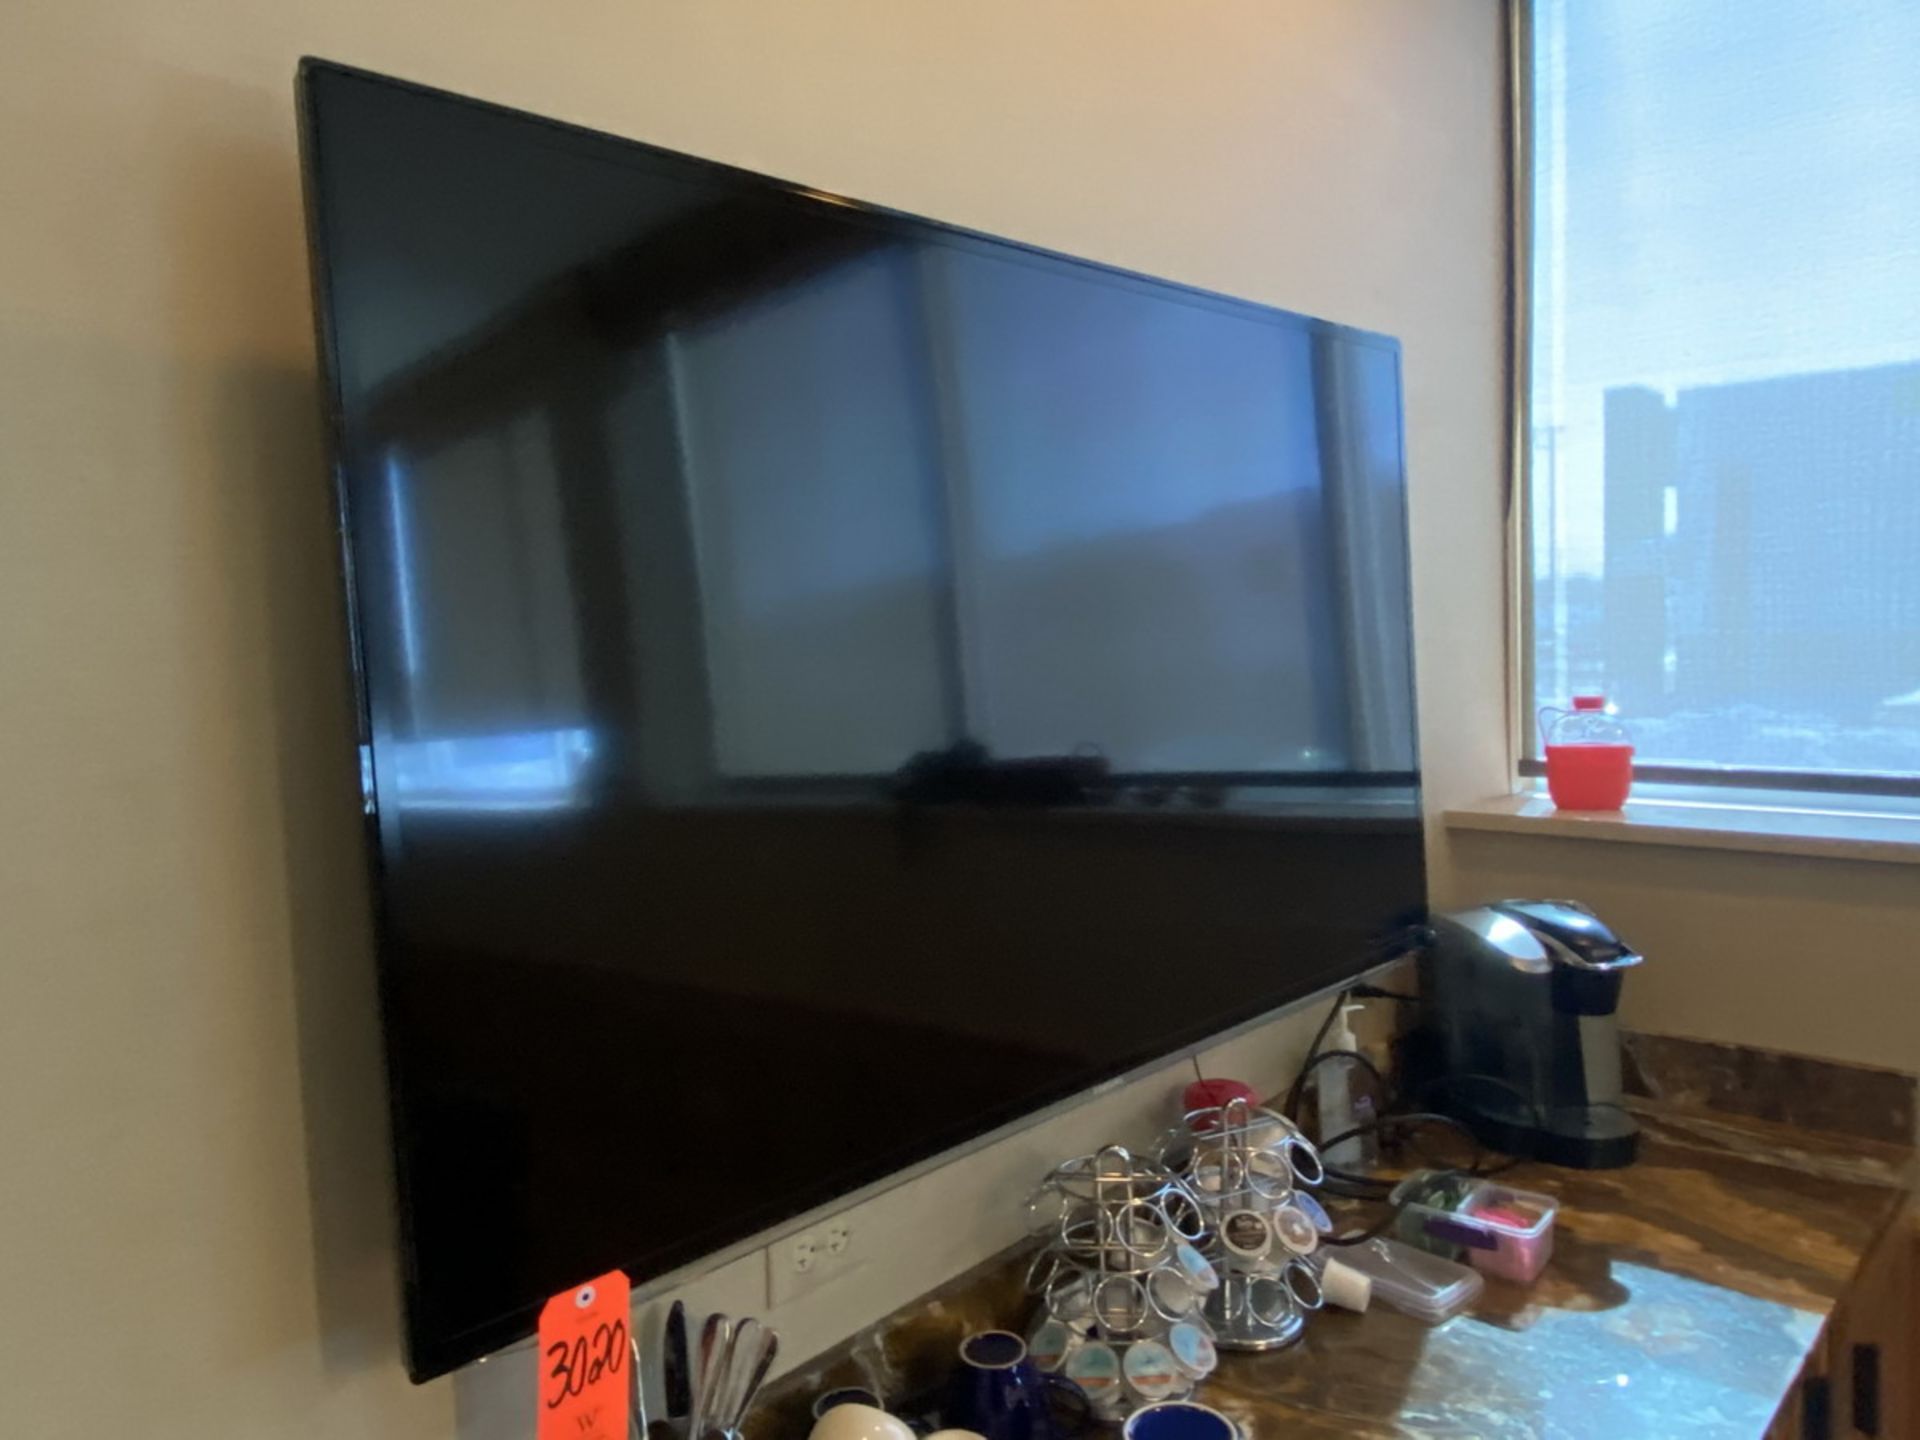 Samsung 60 in. Flatscreen TV (Delayed Removal - Cannot Begin Removal Until 4/23/2021) - (Located In: